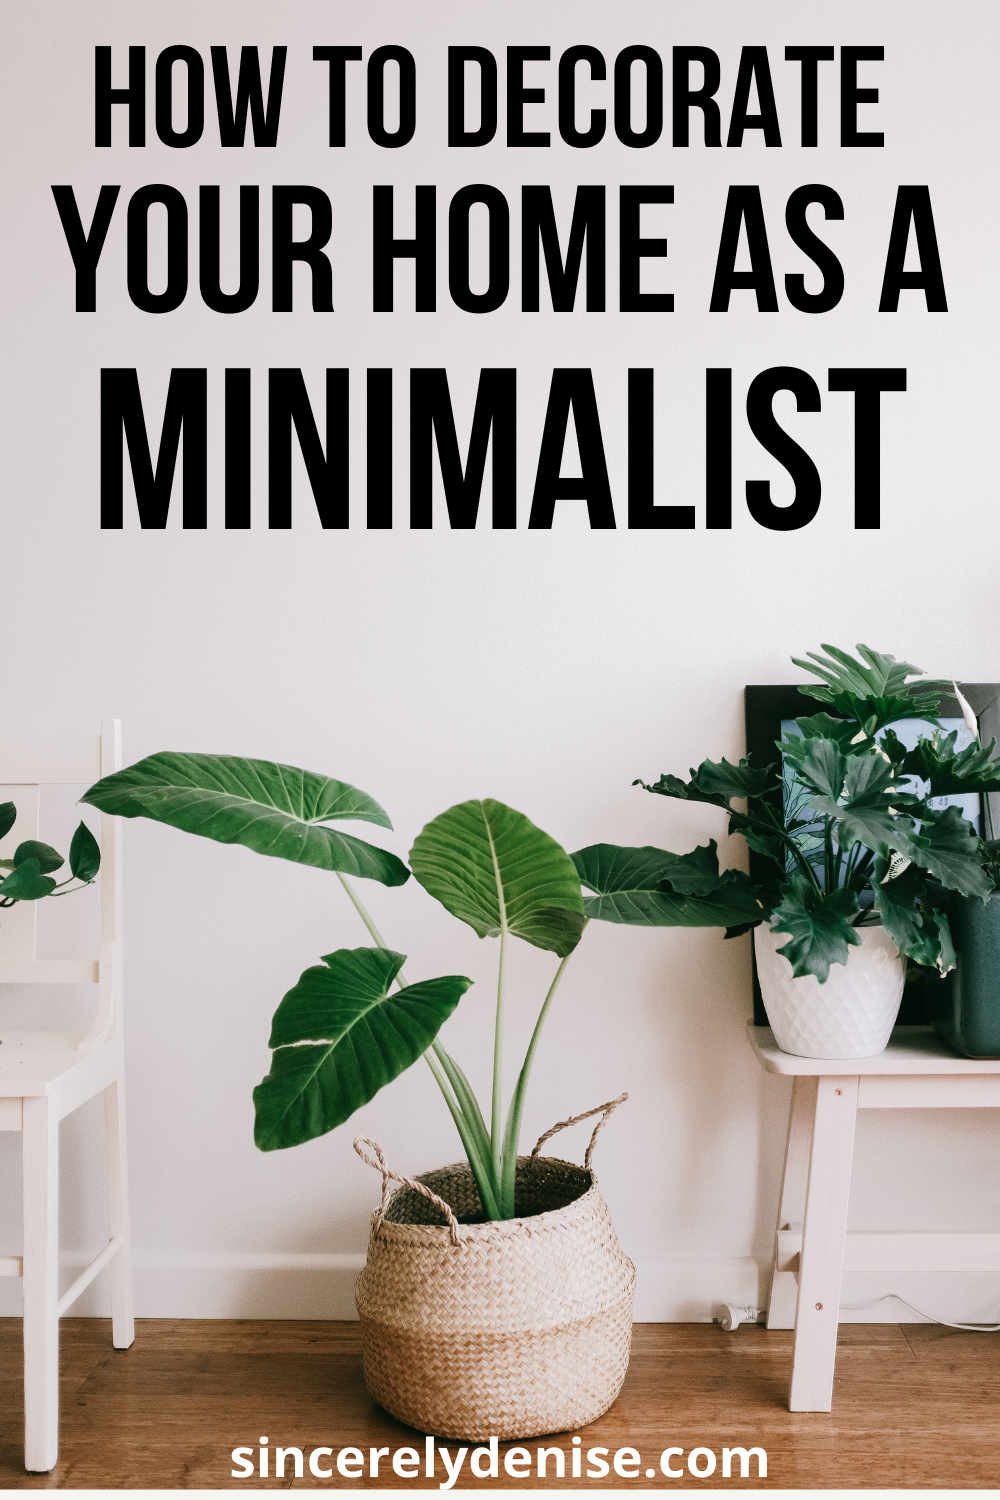 Minimalist Decorating Tips: How to Decorate Your Home Without Adding